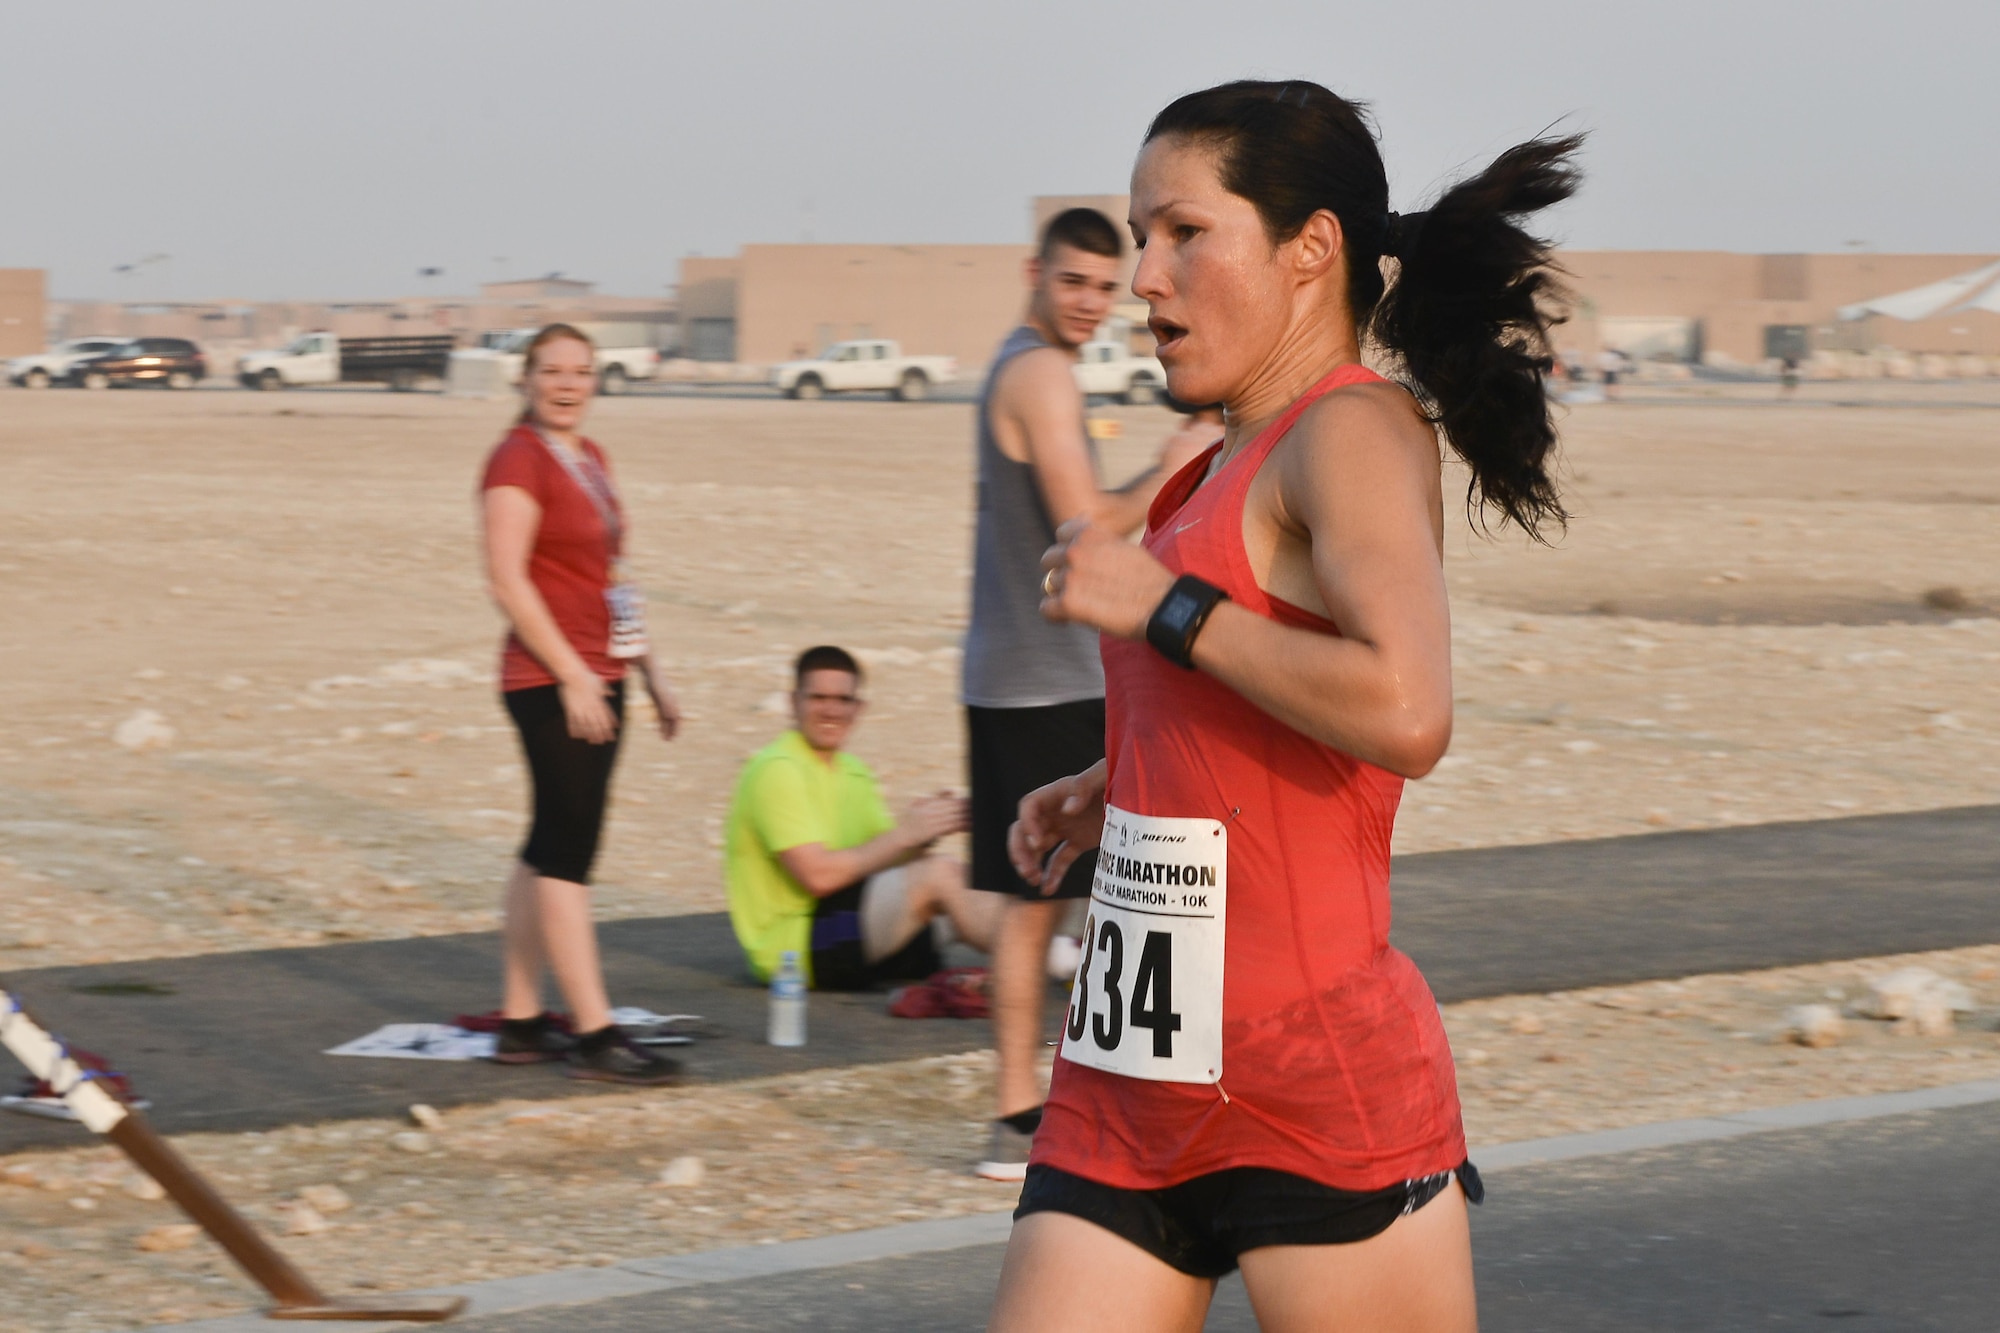 Capt. Alycia Hackenburg, Air Force Central Command, crosses the finish line as the first female to complete 13.1 miles at the 2015 Air Force Marathon Forward September 13, 2015 at Al Udeid Air Base, Qatar. This will mark seven years that the race has taken place at seven operating bases in theater. The first Air Force Marathon was held in 1997 at Wright-Patterson Air Force Base, Ohio. Since then, each marathon has been held the third Saturday of September, with an aircraft chosen each year to represent Air Force history in flight. (U.S. Air Force photo/ Staff Sgt. Alexandre Montes) 